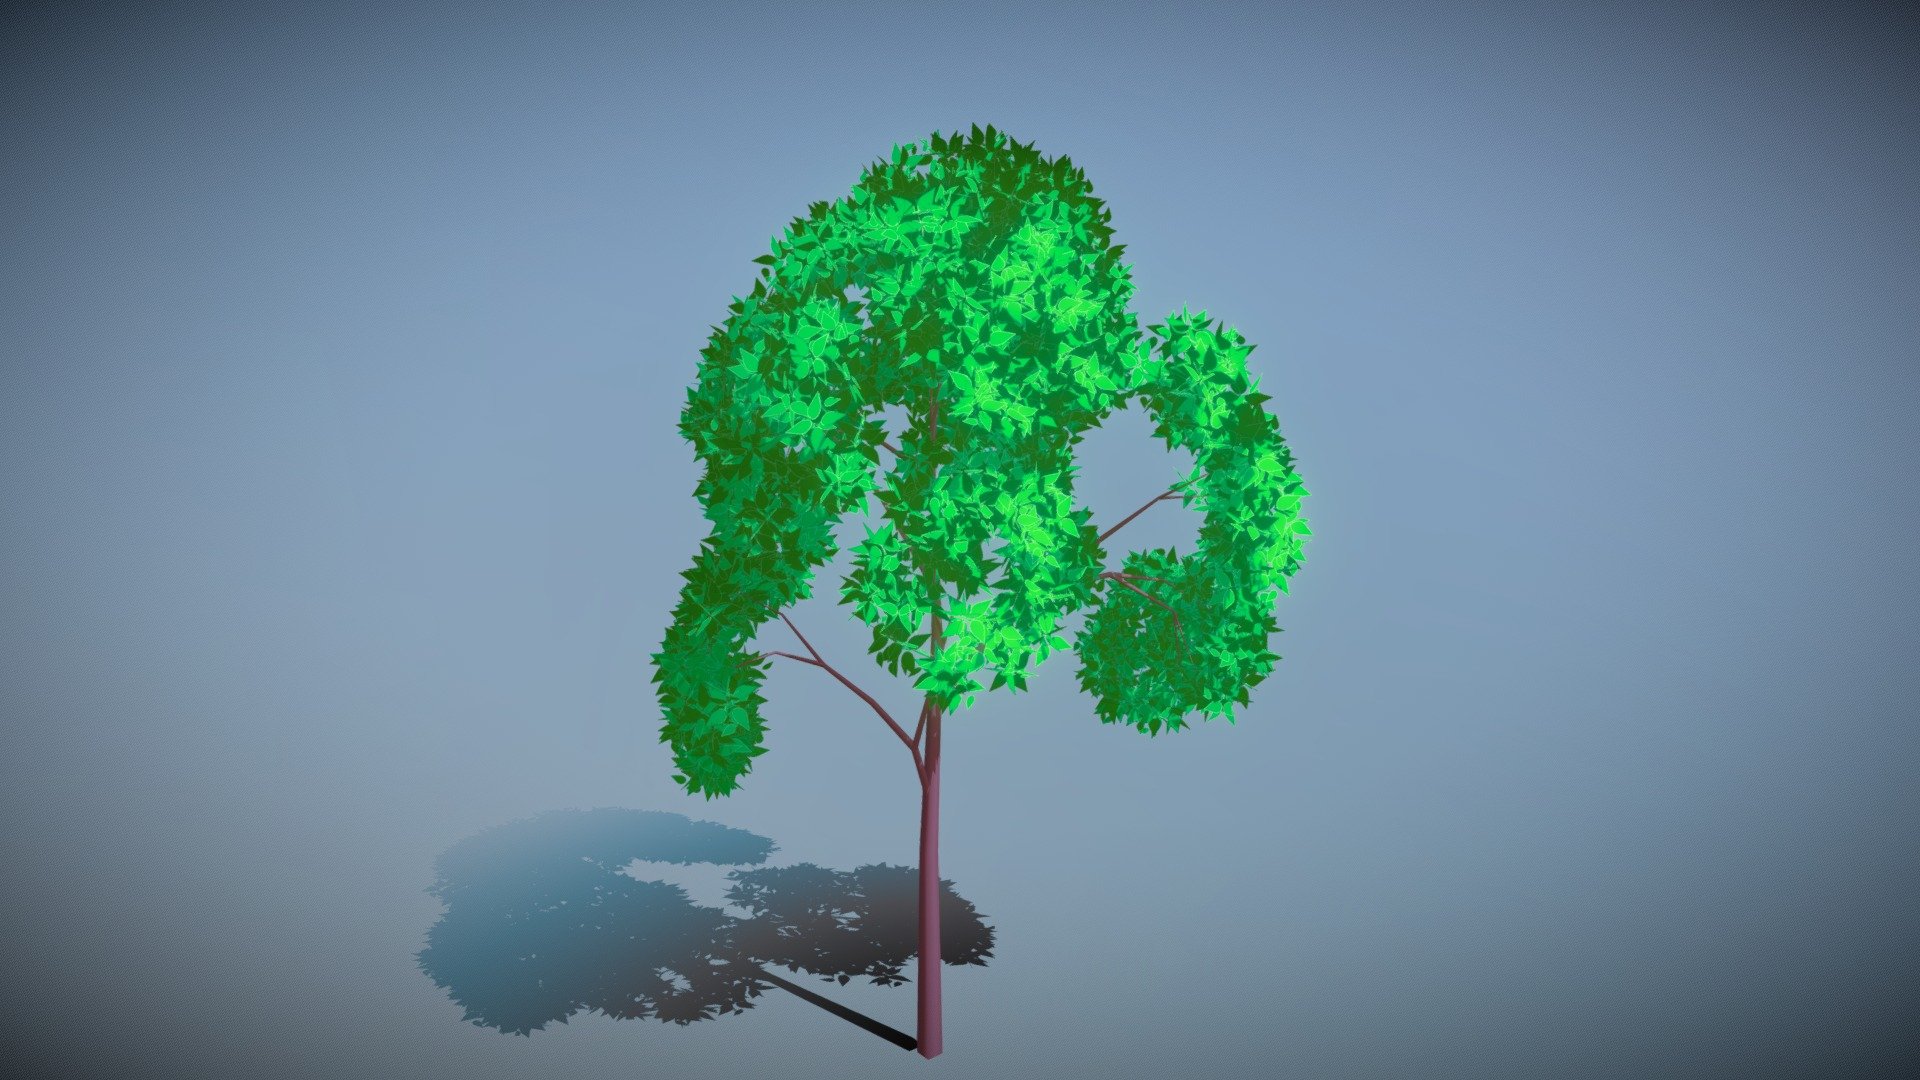 This is a high quality stylized tree model made with blender and the textures are created with photoshop.
You can use in any 3d work or in game engine, 
**To use is in blender **
1. Import the model
2. Add image node with the shader
3. open the texture in the image node
4. Plug the alpha to Principle BSDF alpha and color to base color - Stylized fluffy tree - Download Free 3D model by Hridoy19991 3d model